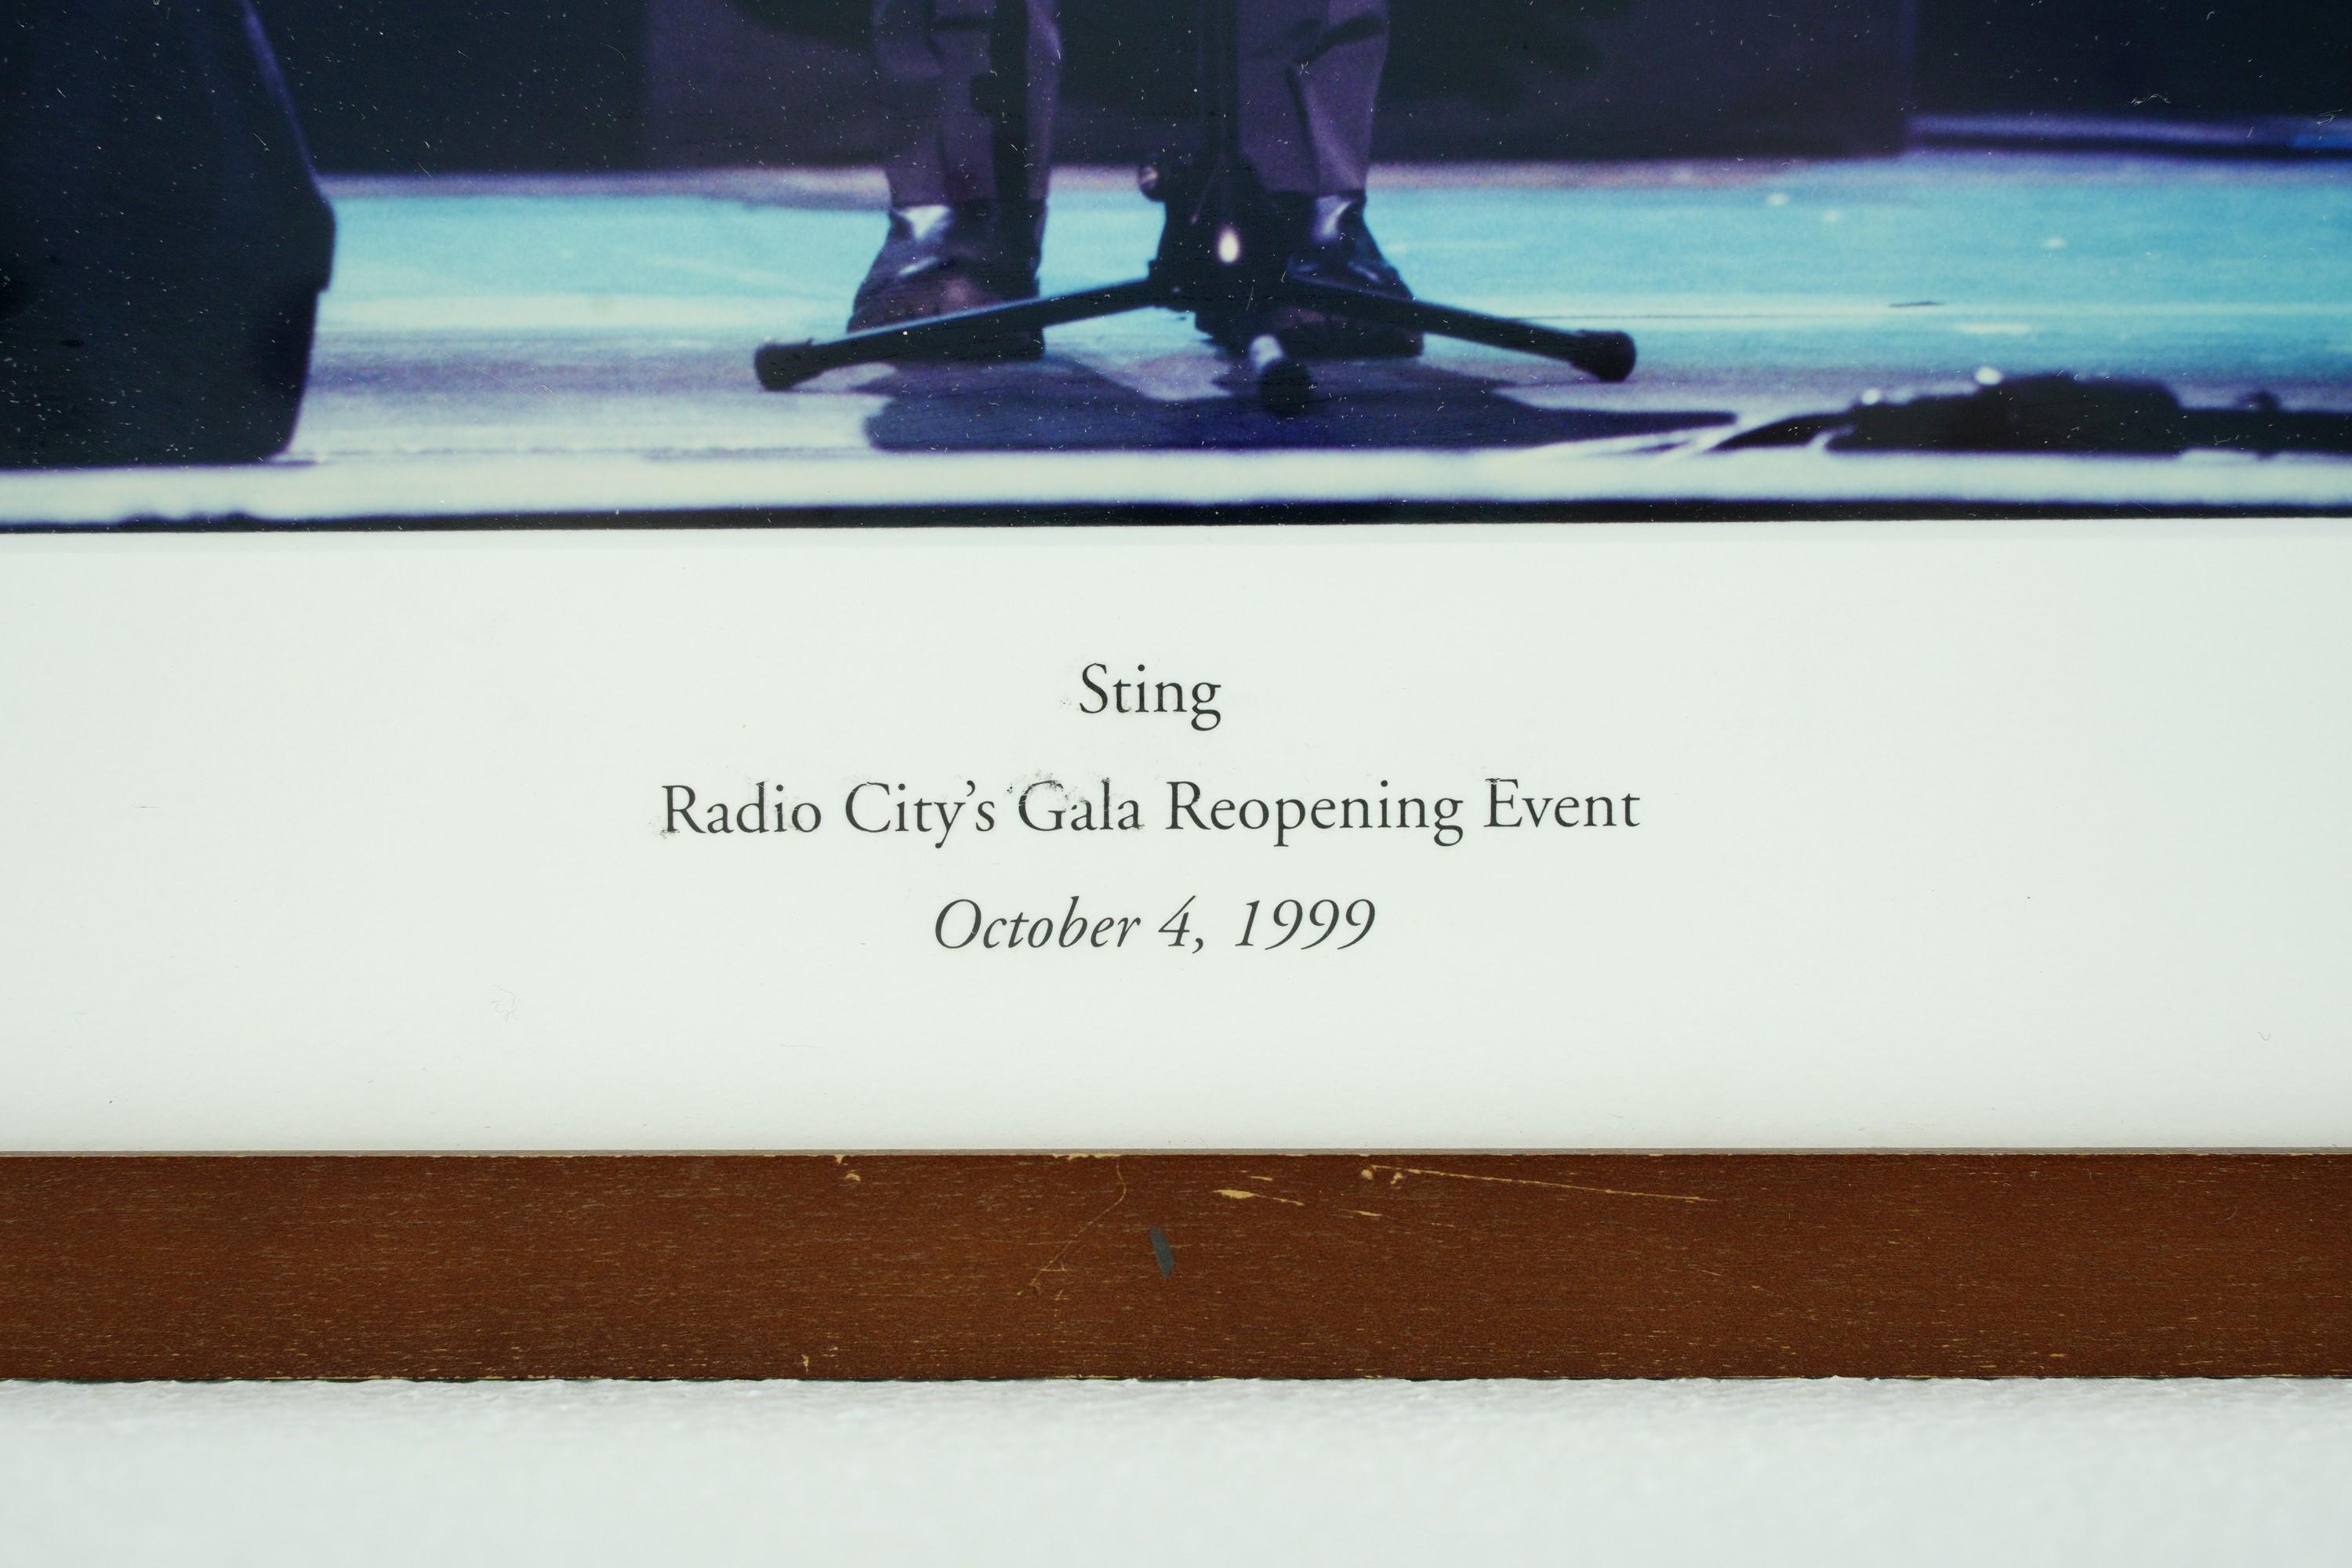 Painted wood framed and matted photograph of Sting at Radio City's Gala Reopening Event. October 4, 1999. The glass is intact and there is a mounting wire attached to the back. This is in good condition, with some scratches in the frame. Please